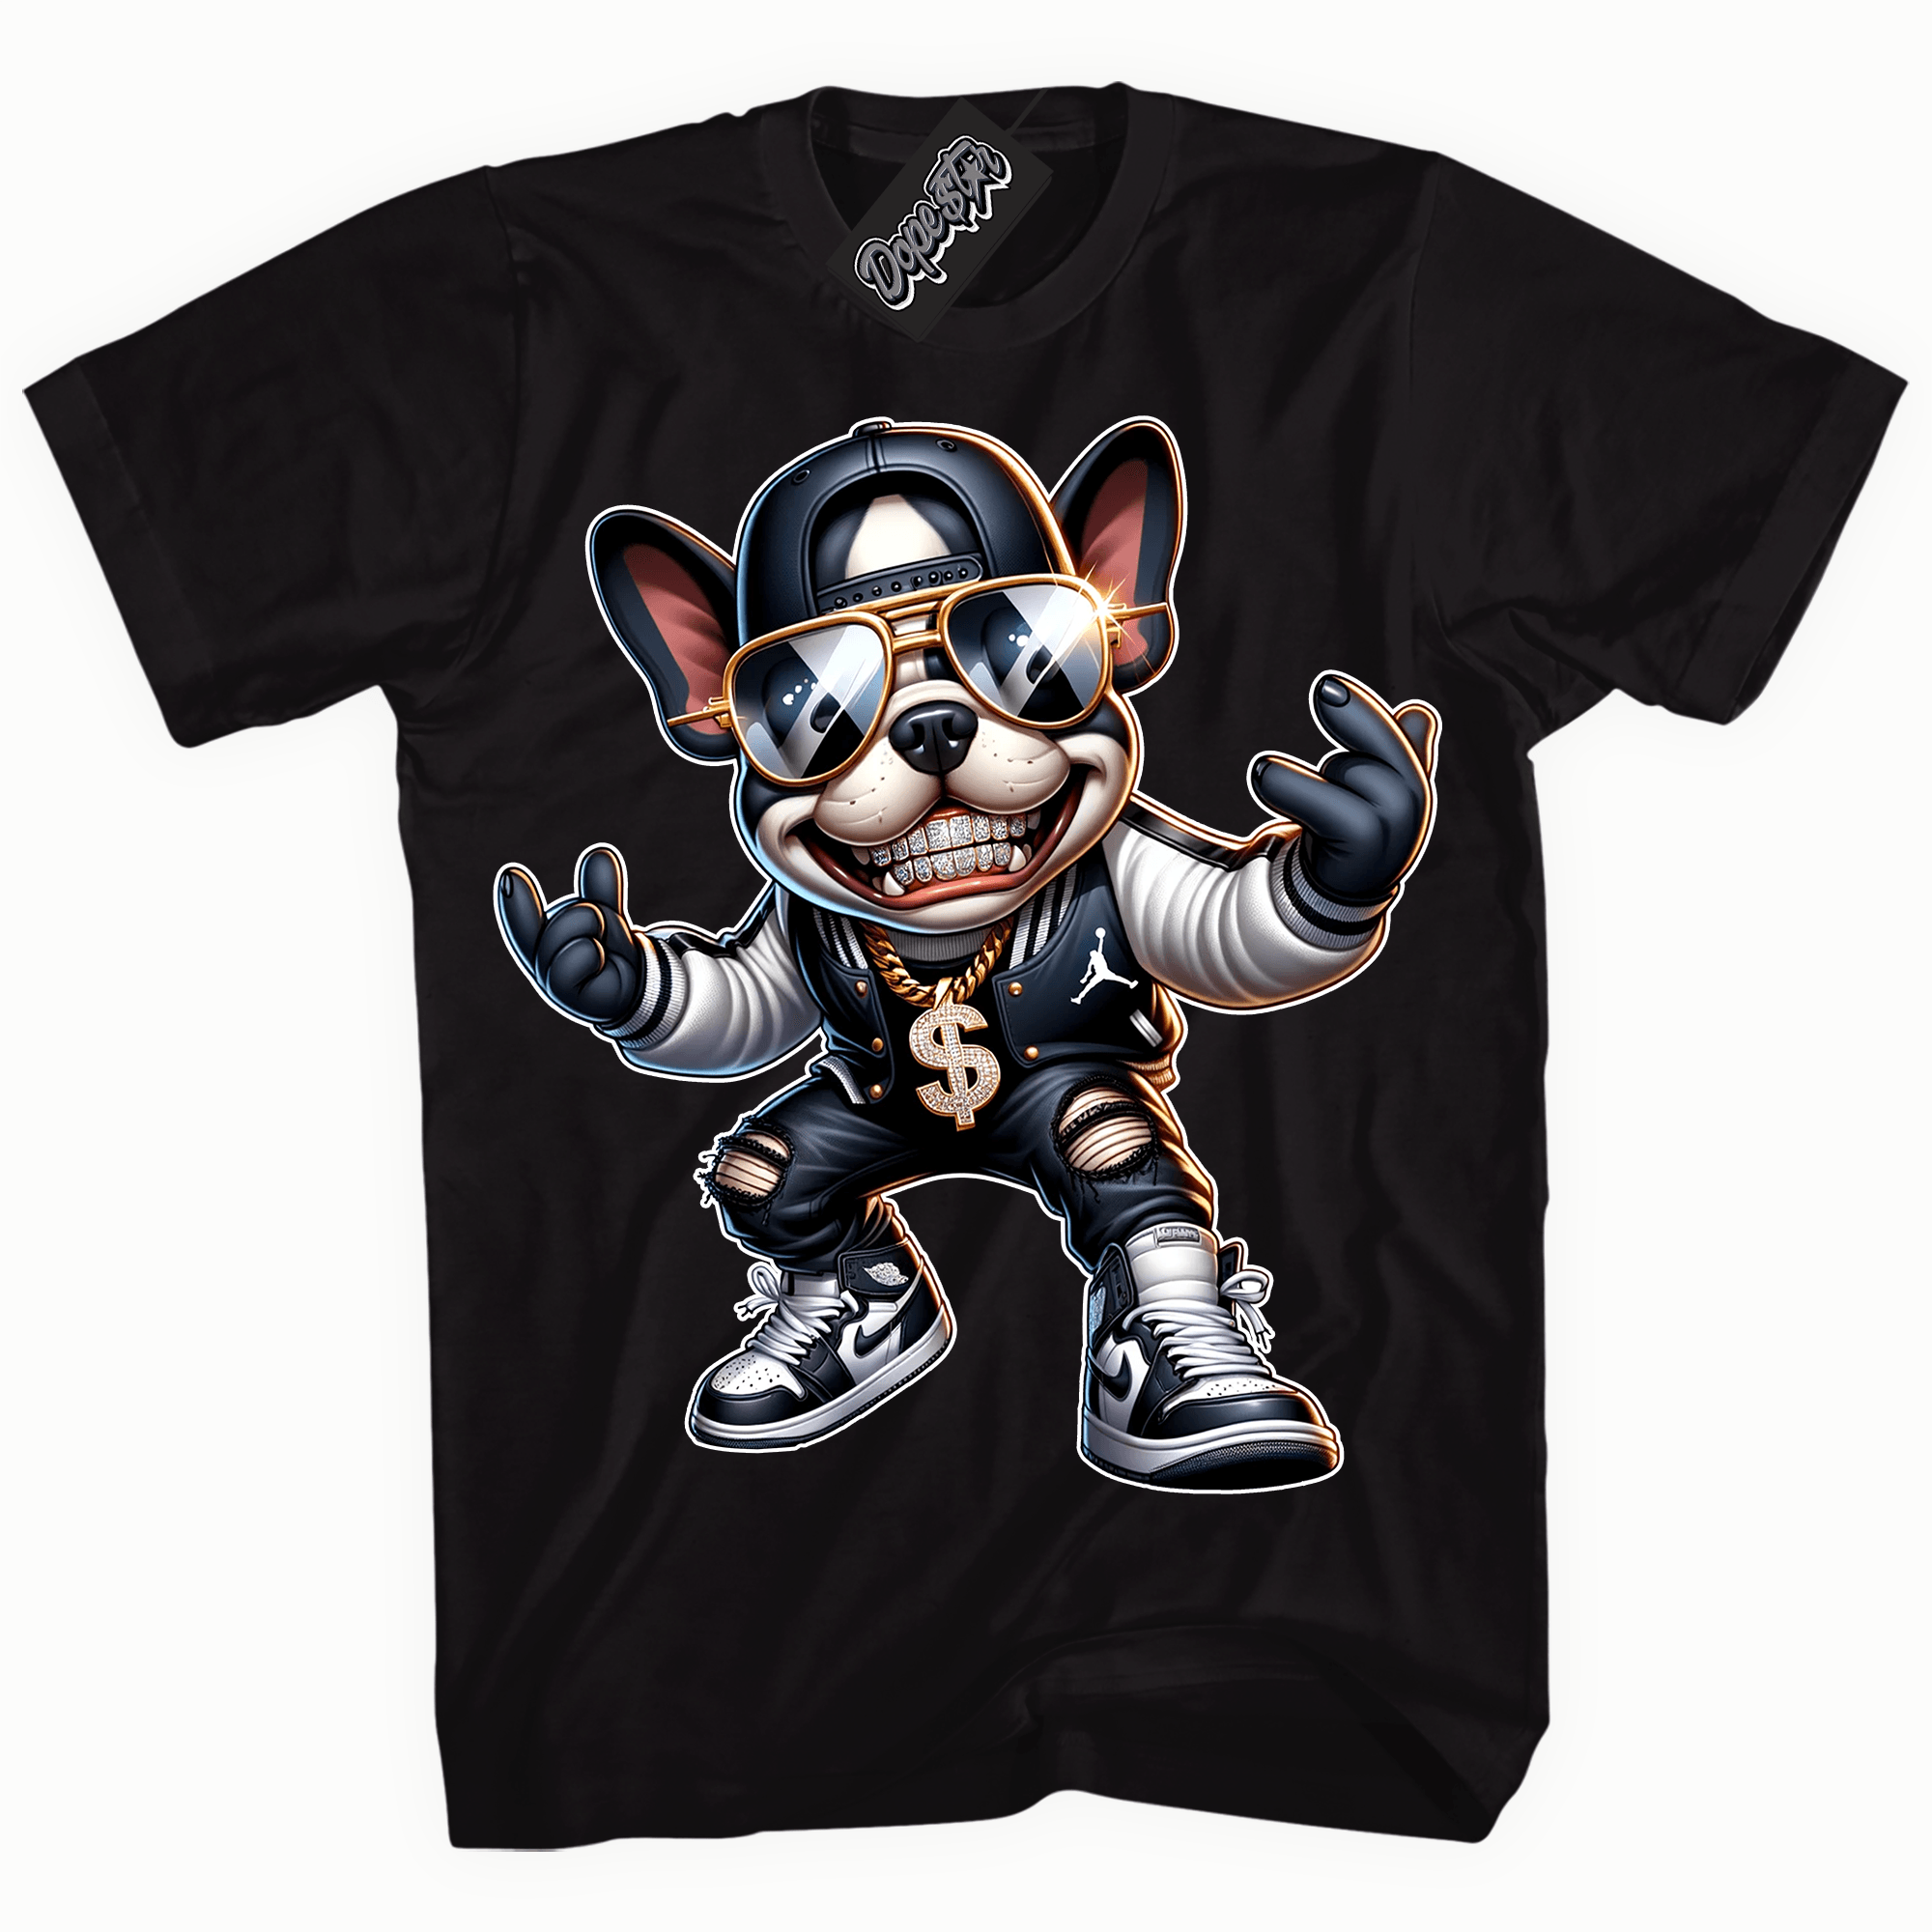 Cool Black Shirt With Frenchie OG design That Perfectly Matches Air Jordan 1 Retro High OG Black And White Sneakers.